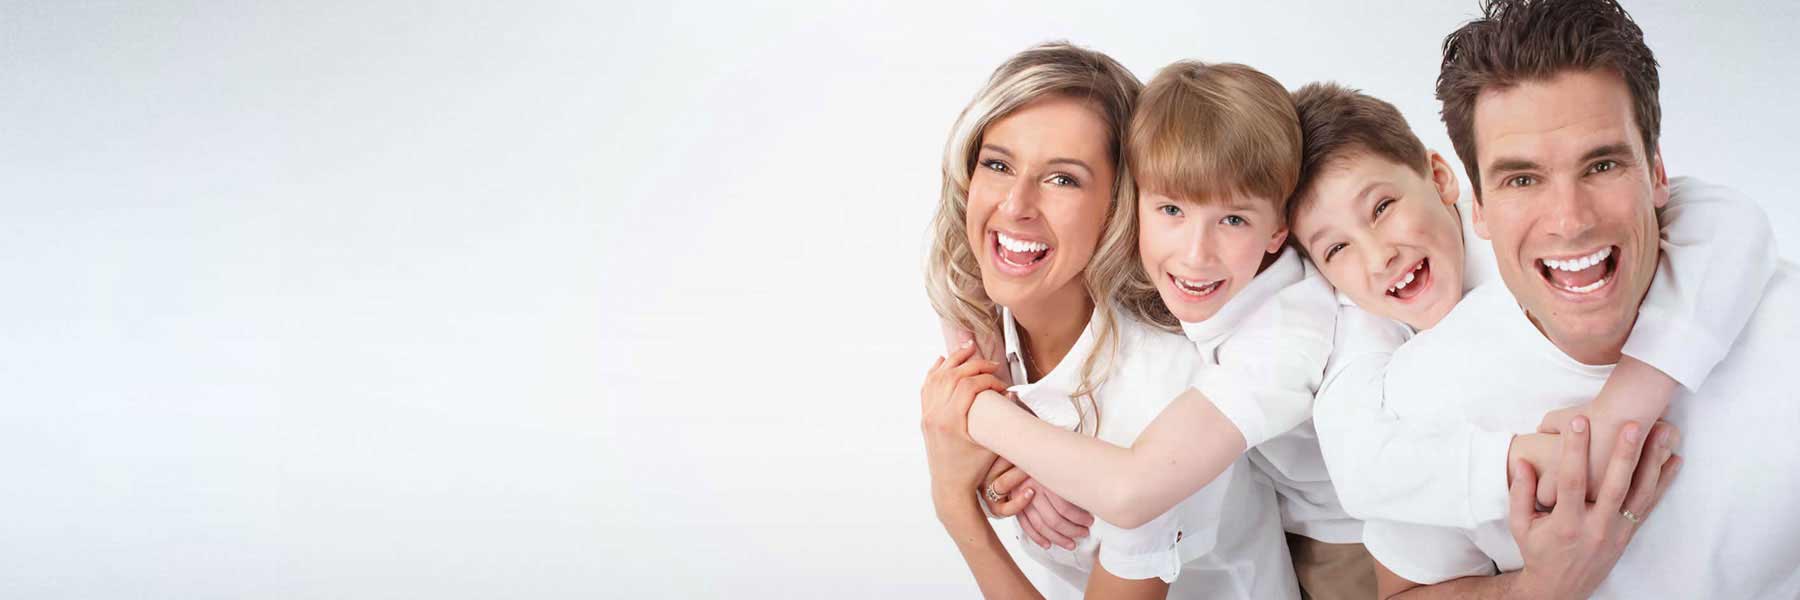 General Dentistry Service in Maitland - Tooth N Care